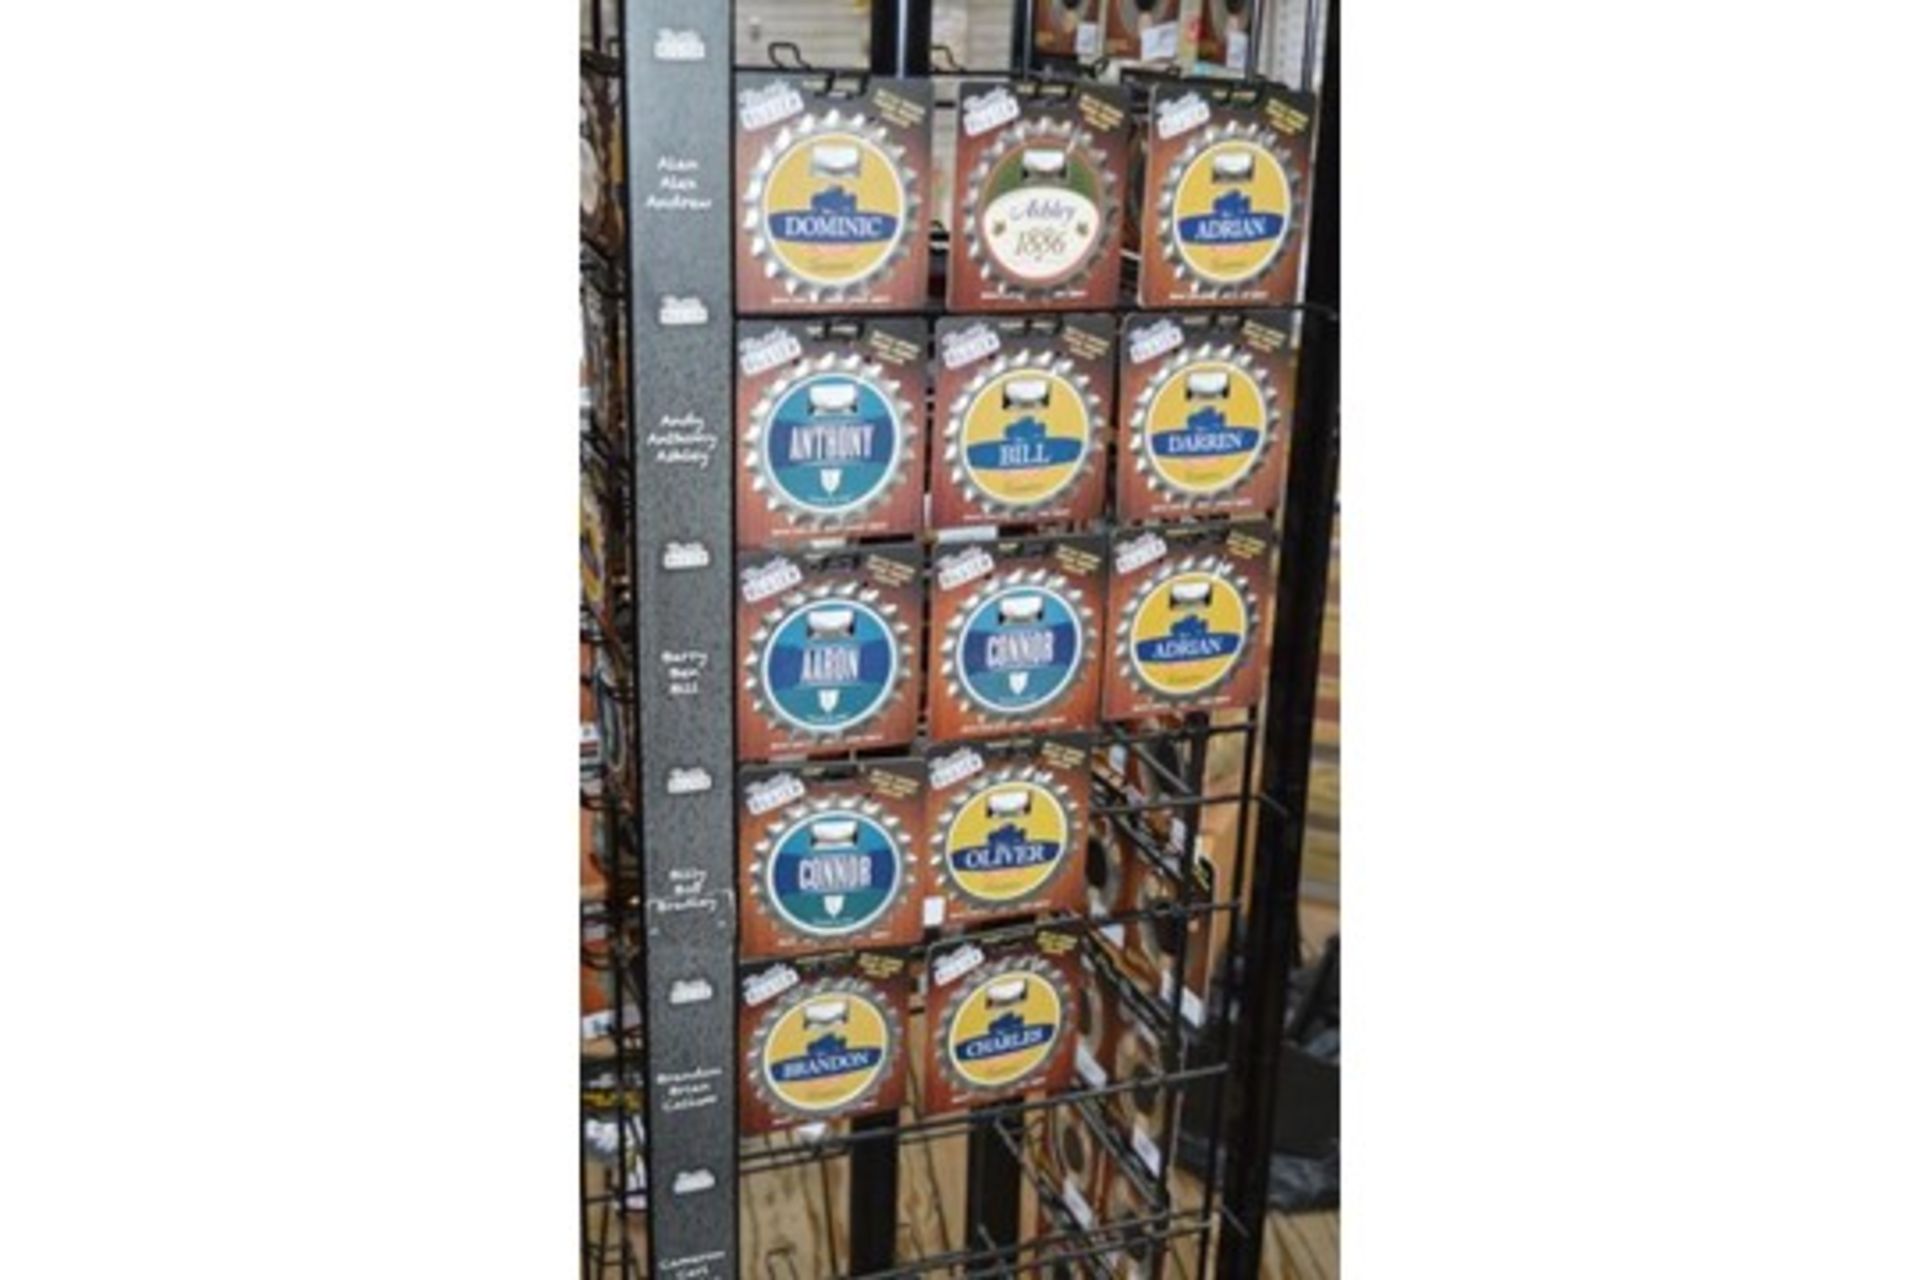 27 x Retail Carousel Display Stands With Approximately 2,800 Items of Resale Stock - Includes - Image 26 of 61